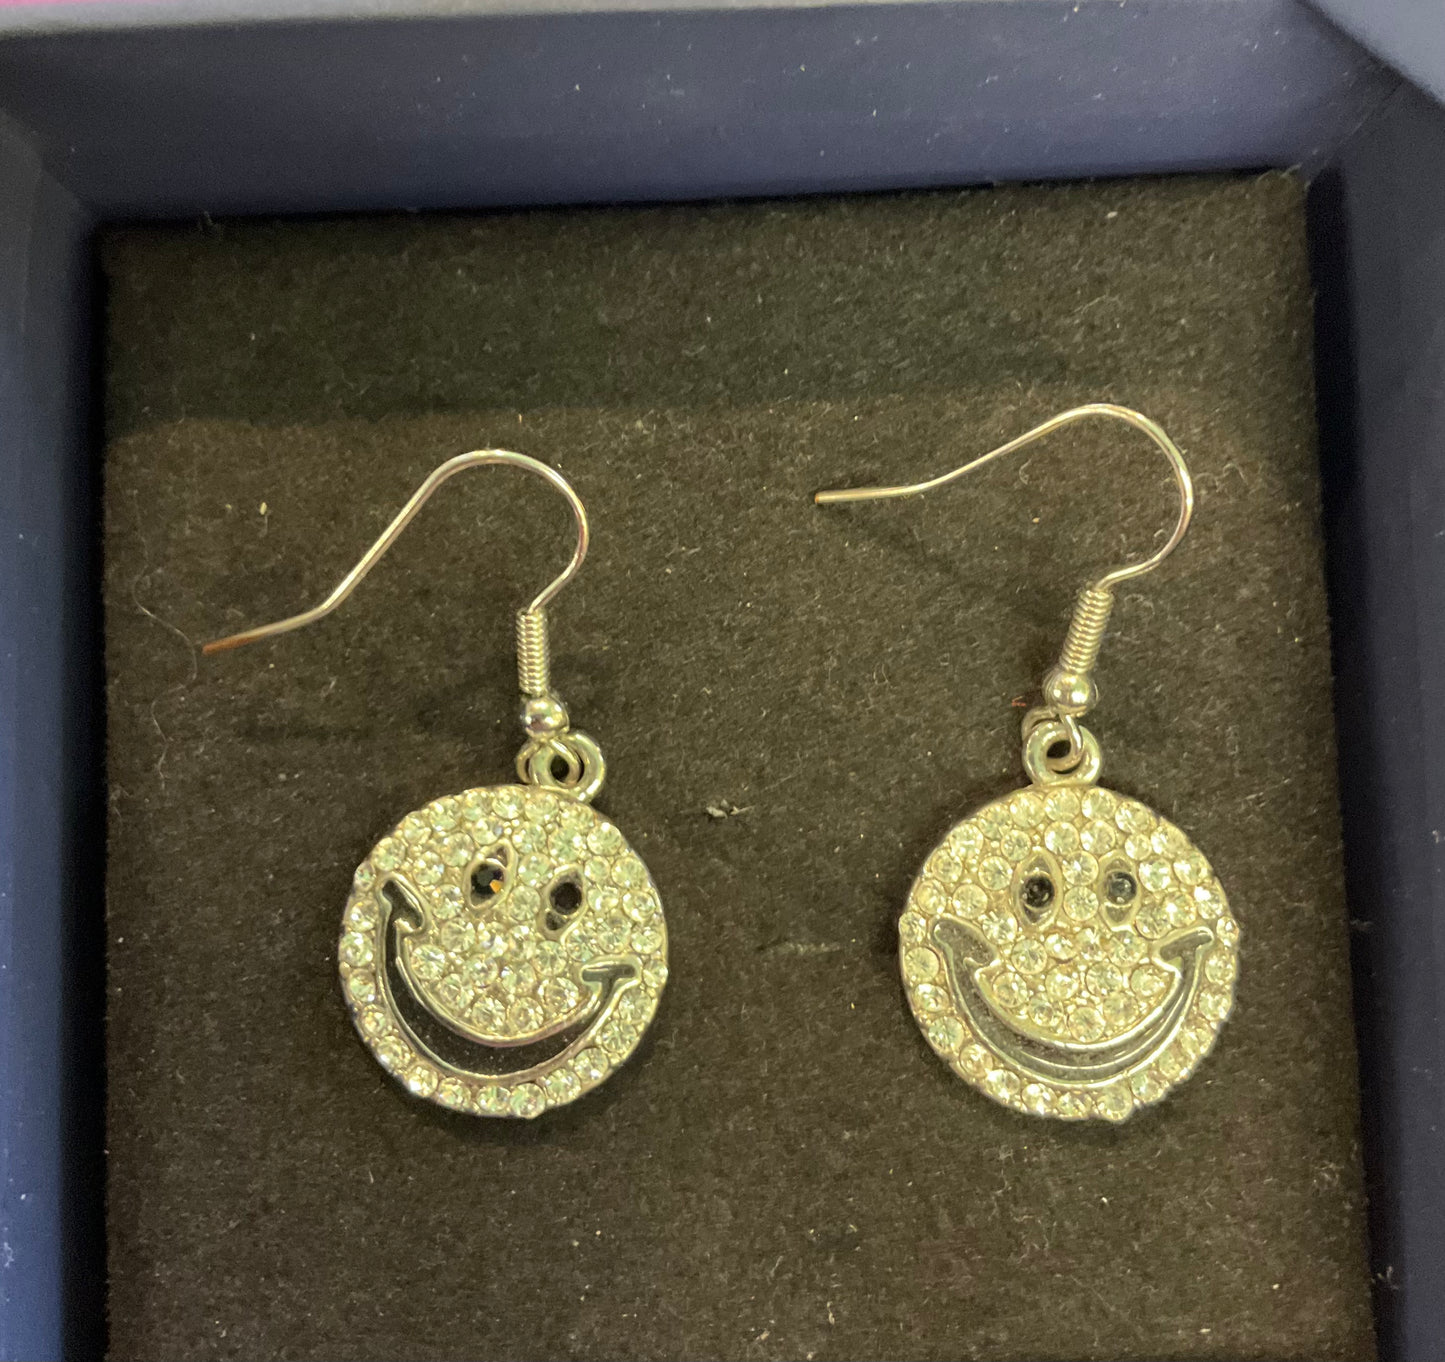 Vintage Butler and Wilson Smiley Face Silver Rhinestone drop earrings, signed